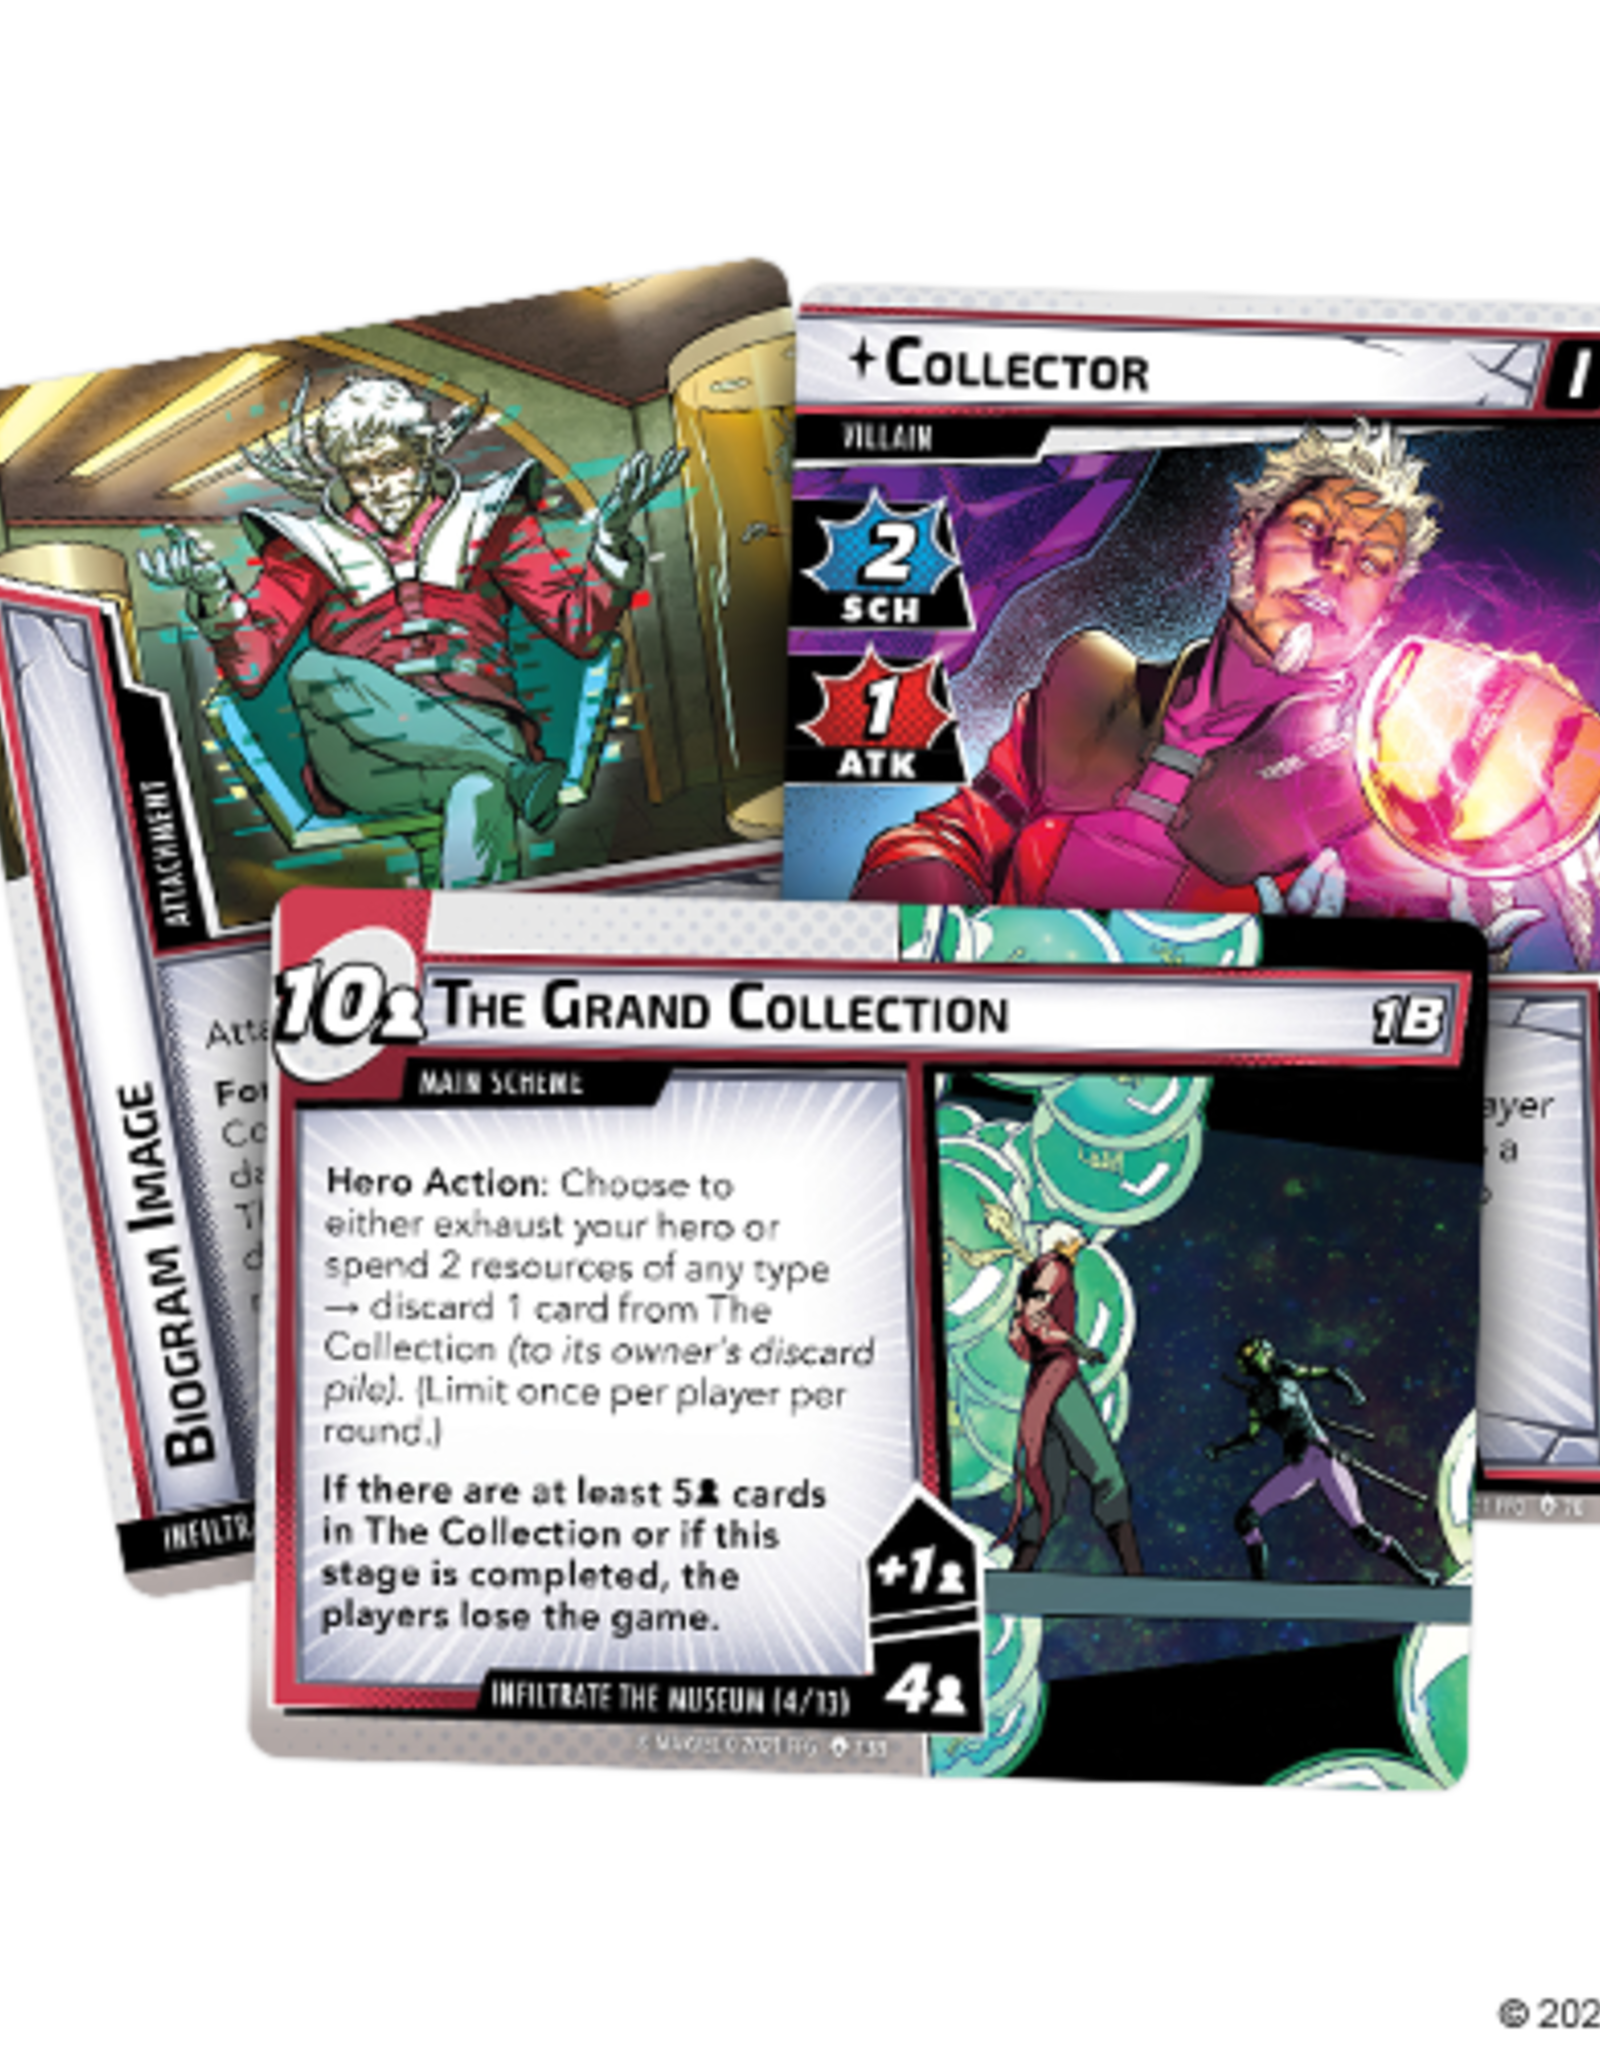 FFG Marvel Champions LCG: The Galaxy's Most Wanted